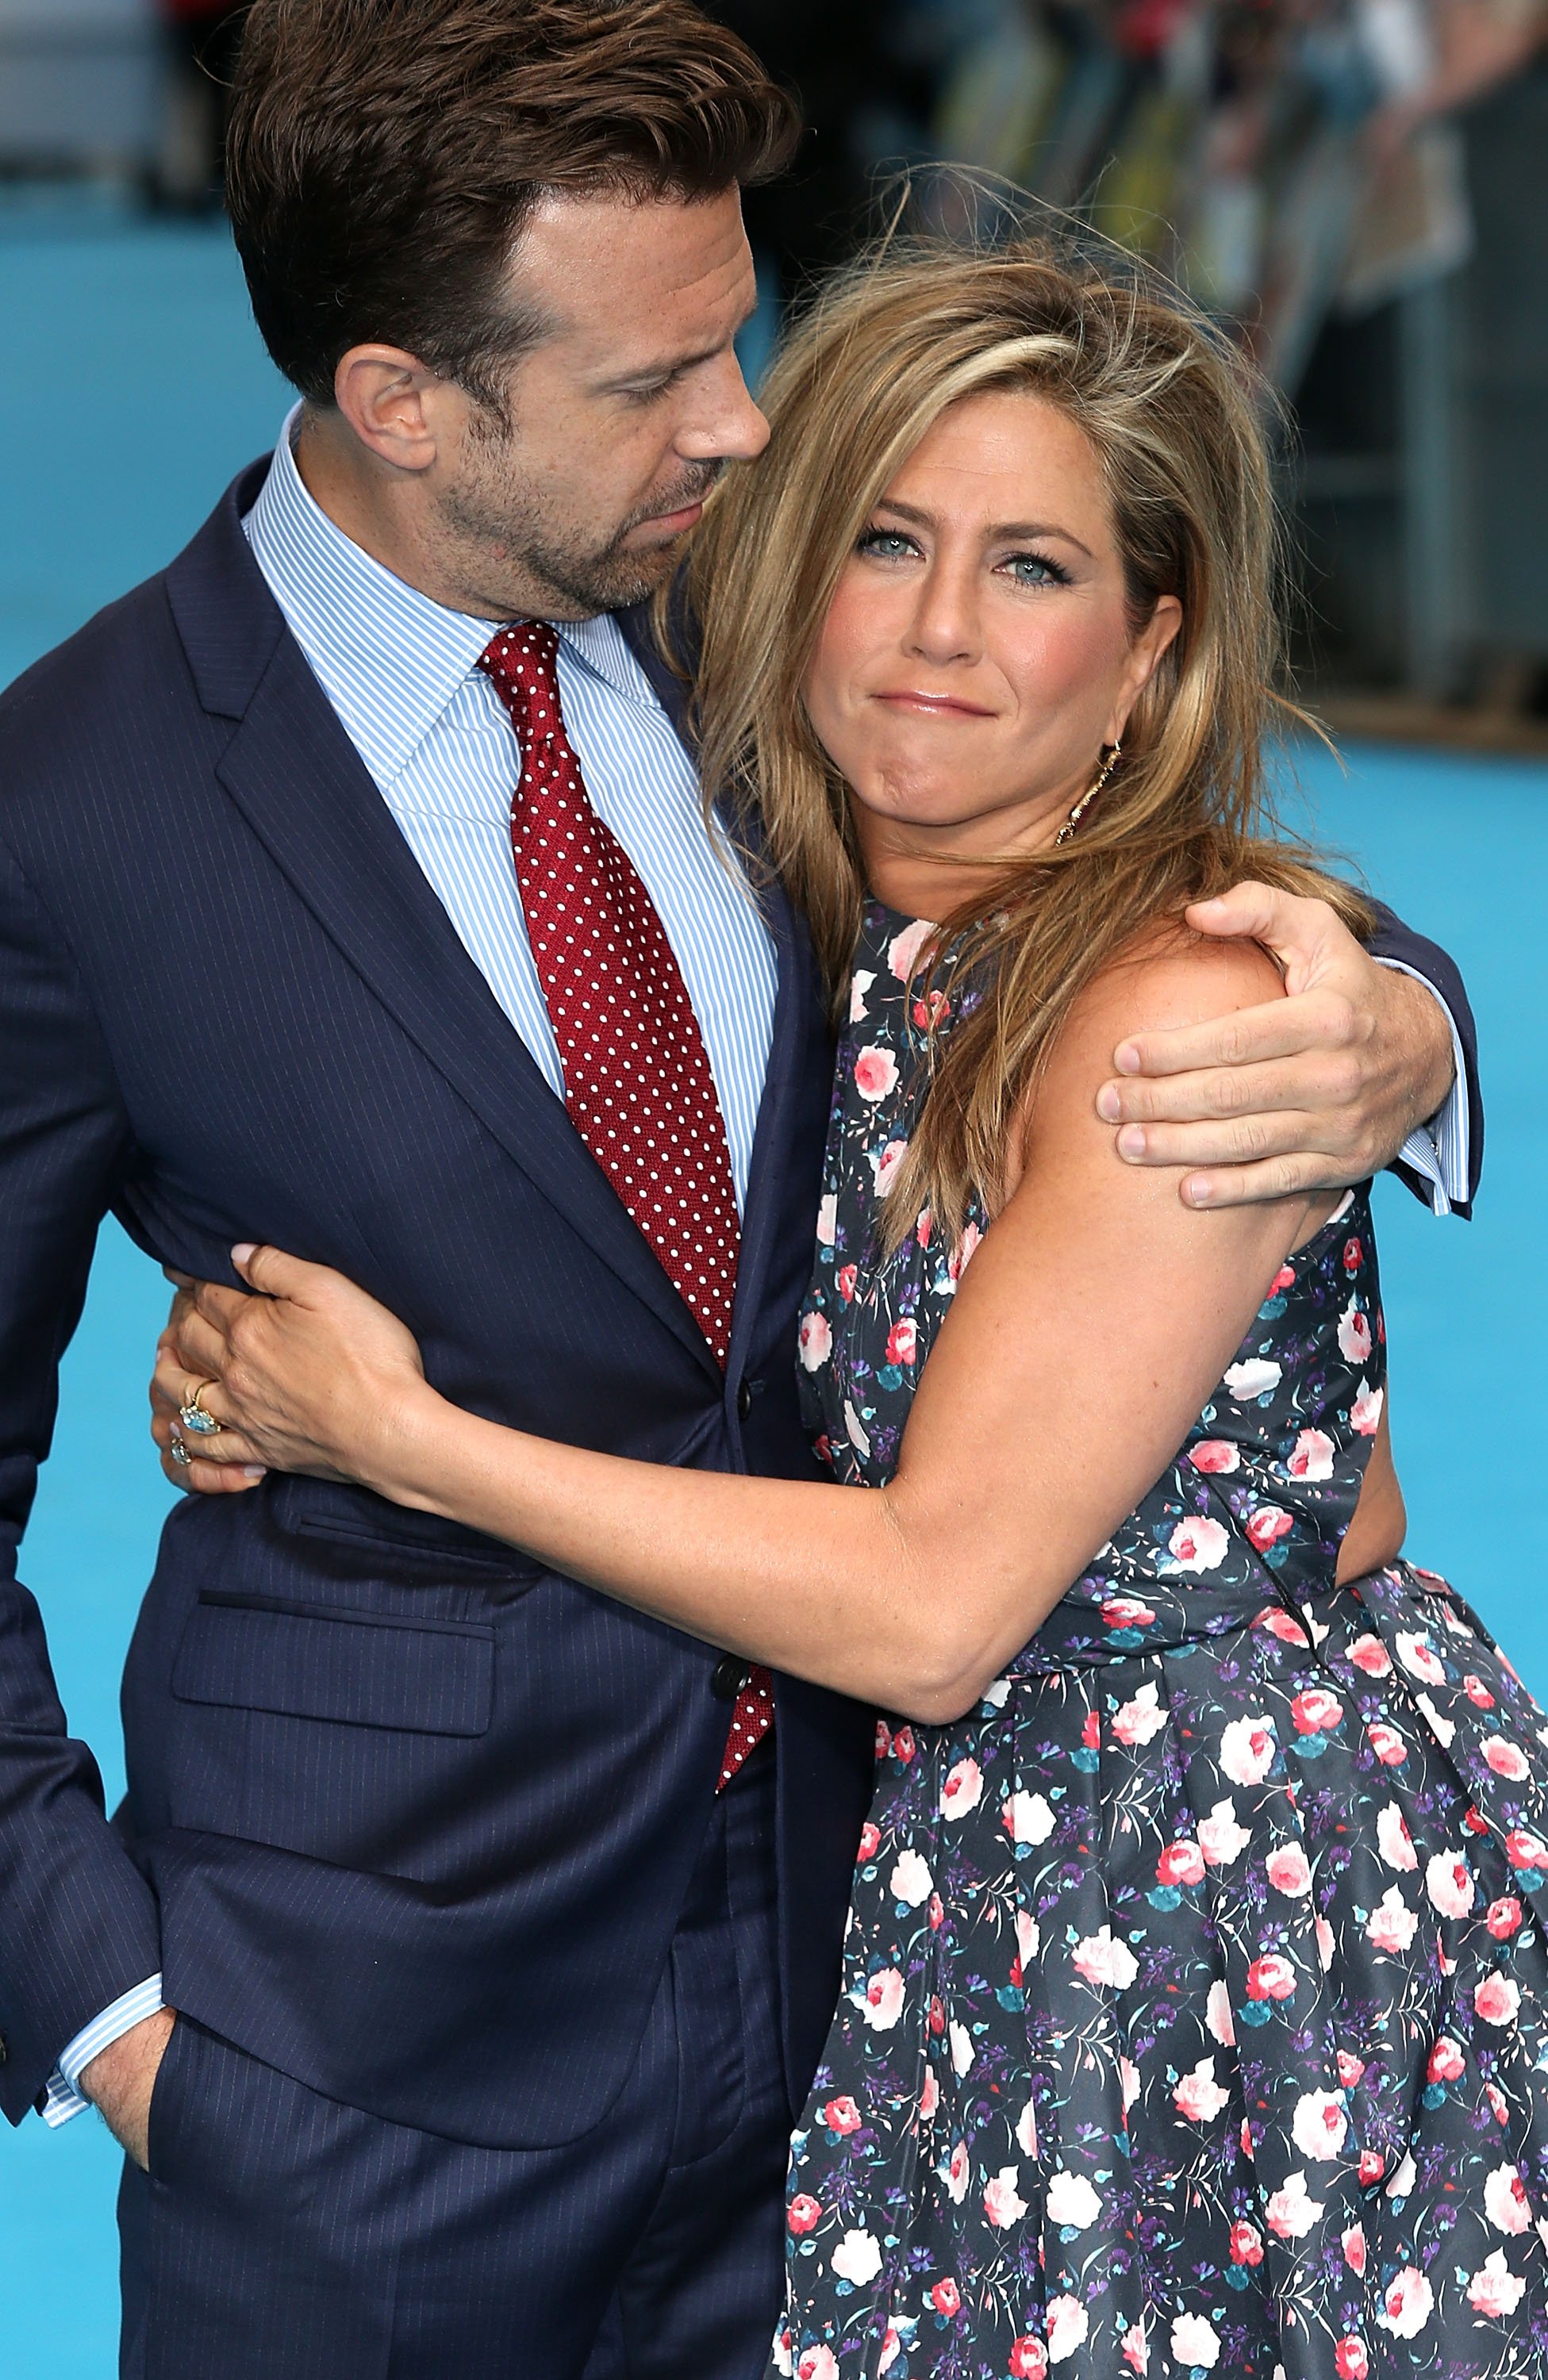 Jason Sudeikis and Jennifer Aniston at the European premiere of "We're The Millers" in London on August 14, 2013 | Source: Getty Images